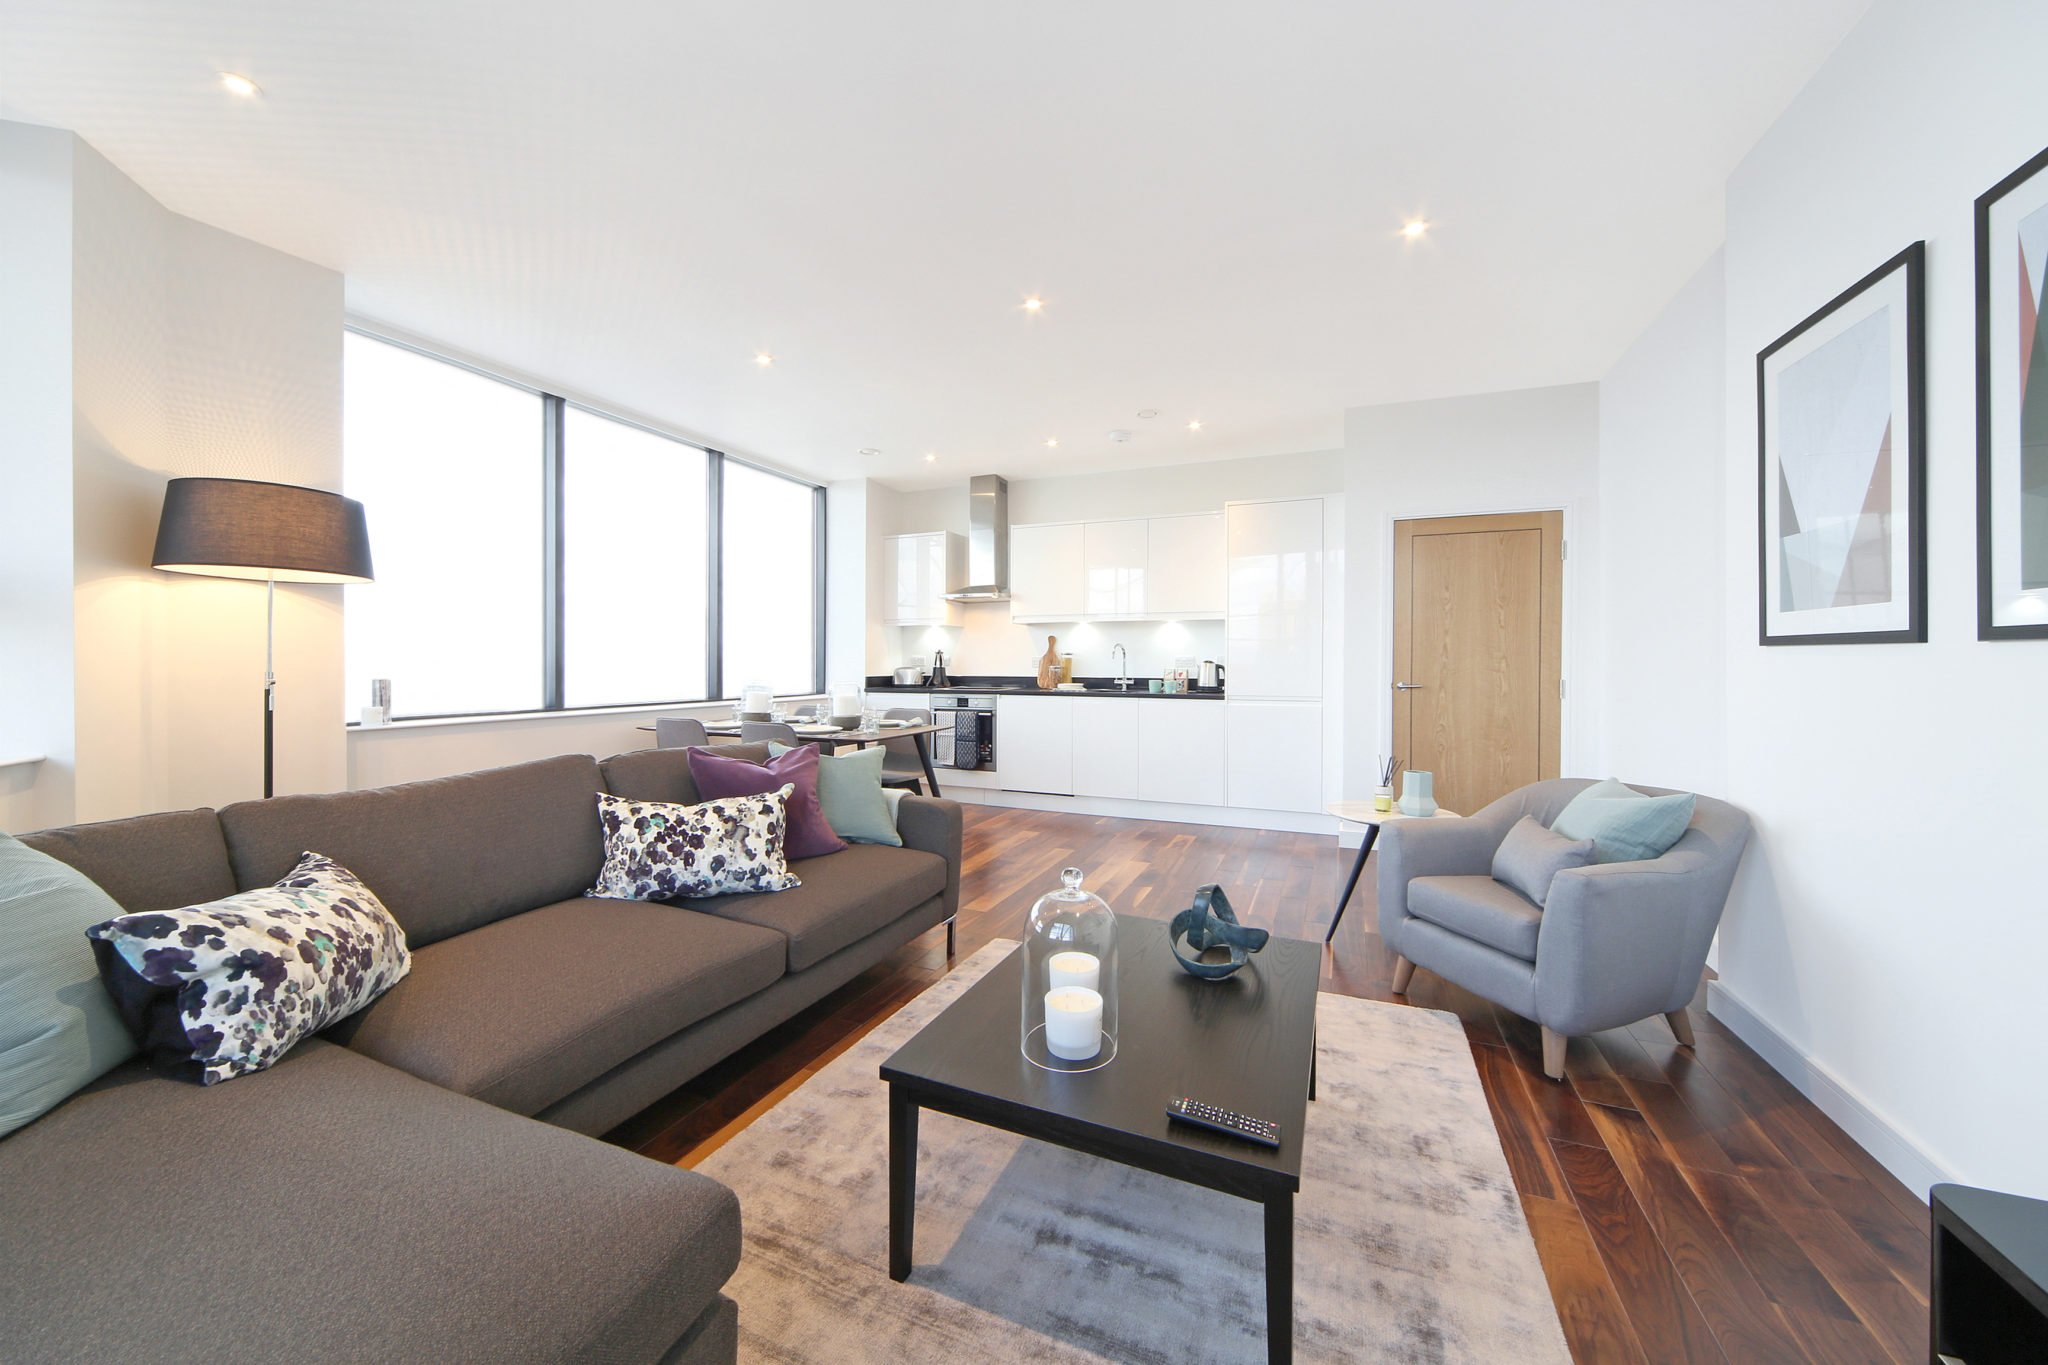 Looking for modern affordable apartments in Harrow? Why not book our Harrow Serviced Apartments College Road today for great rates.